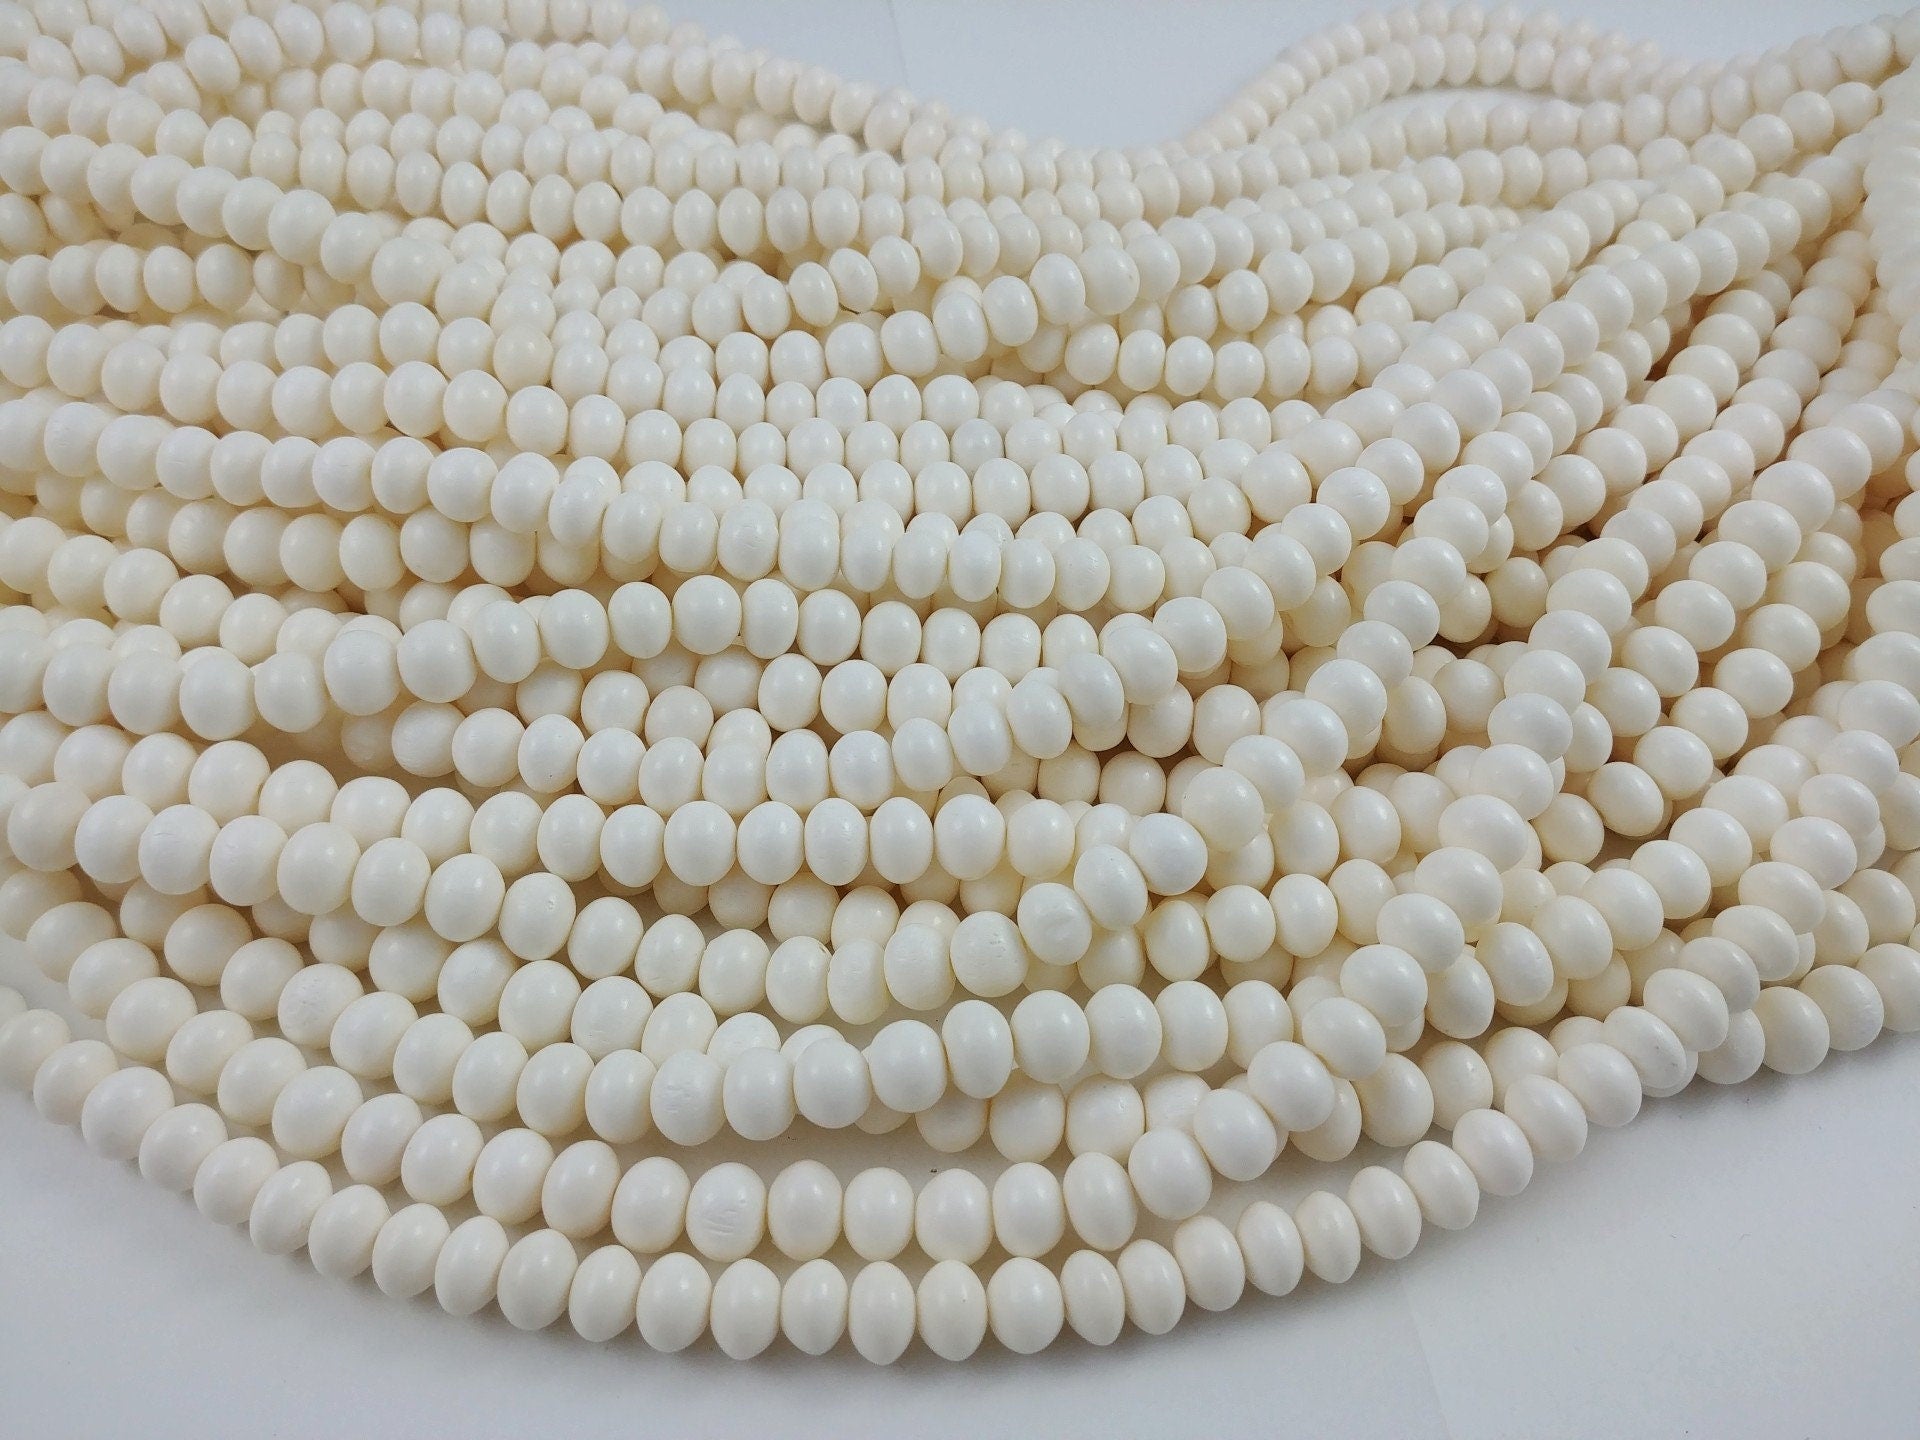 White bone beads, 12 bone rondelle beads 9mm, Eco friendly and natural beads for jewelry making